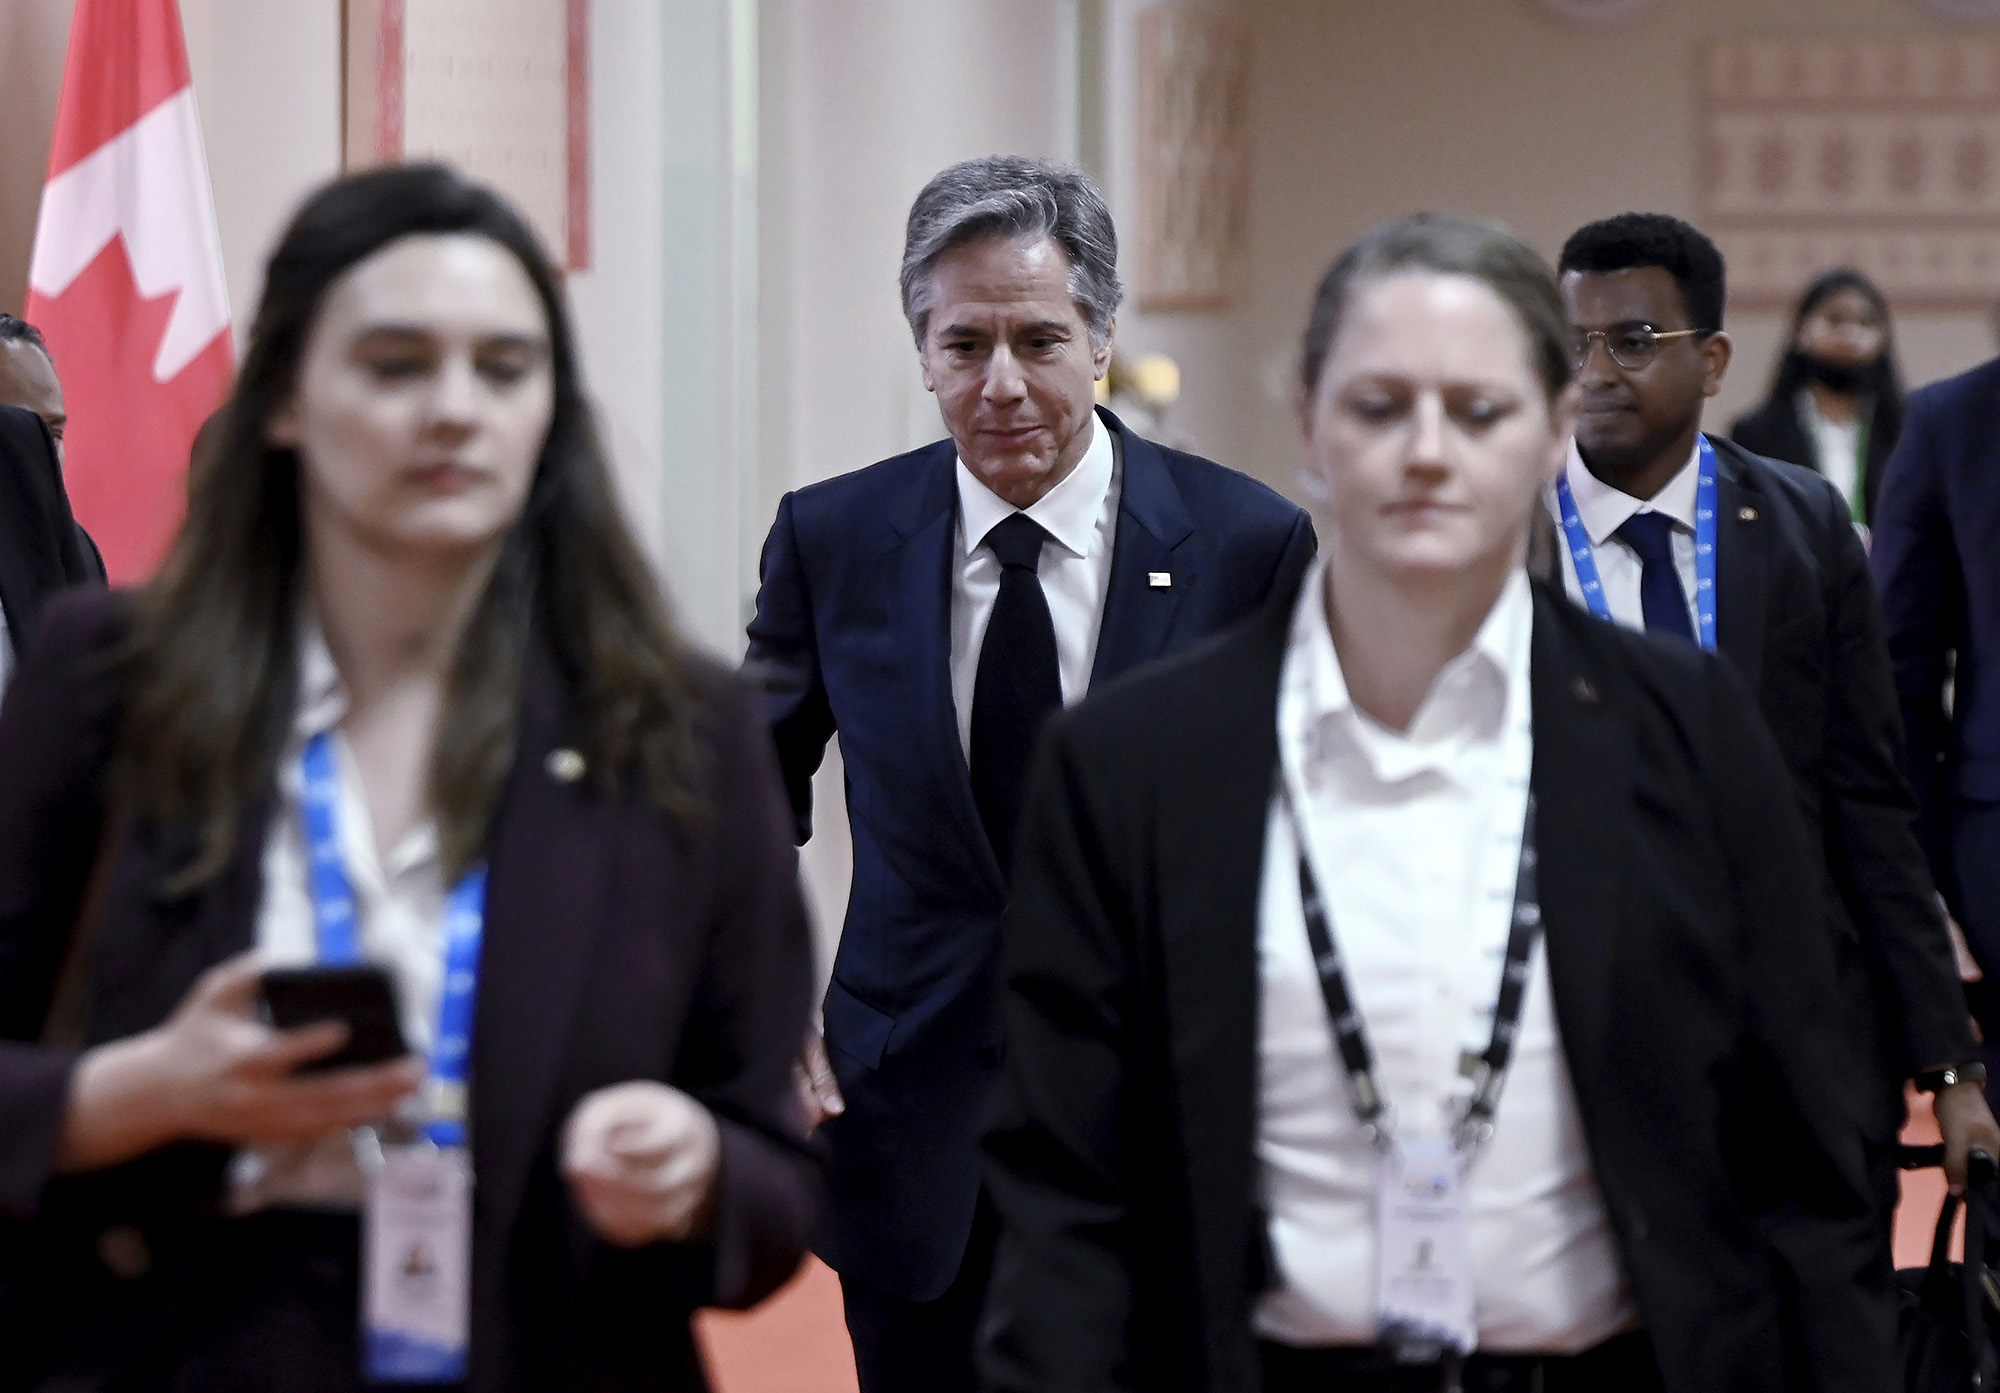 U.S. Secretary of State Antony Blinken walks to a meeting on the sideline of the G20 foreign ministers' meeting in New Delhi, India, on March 2.